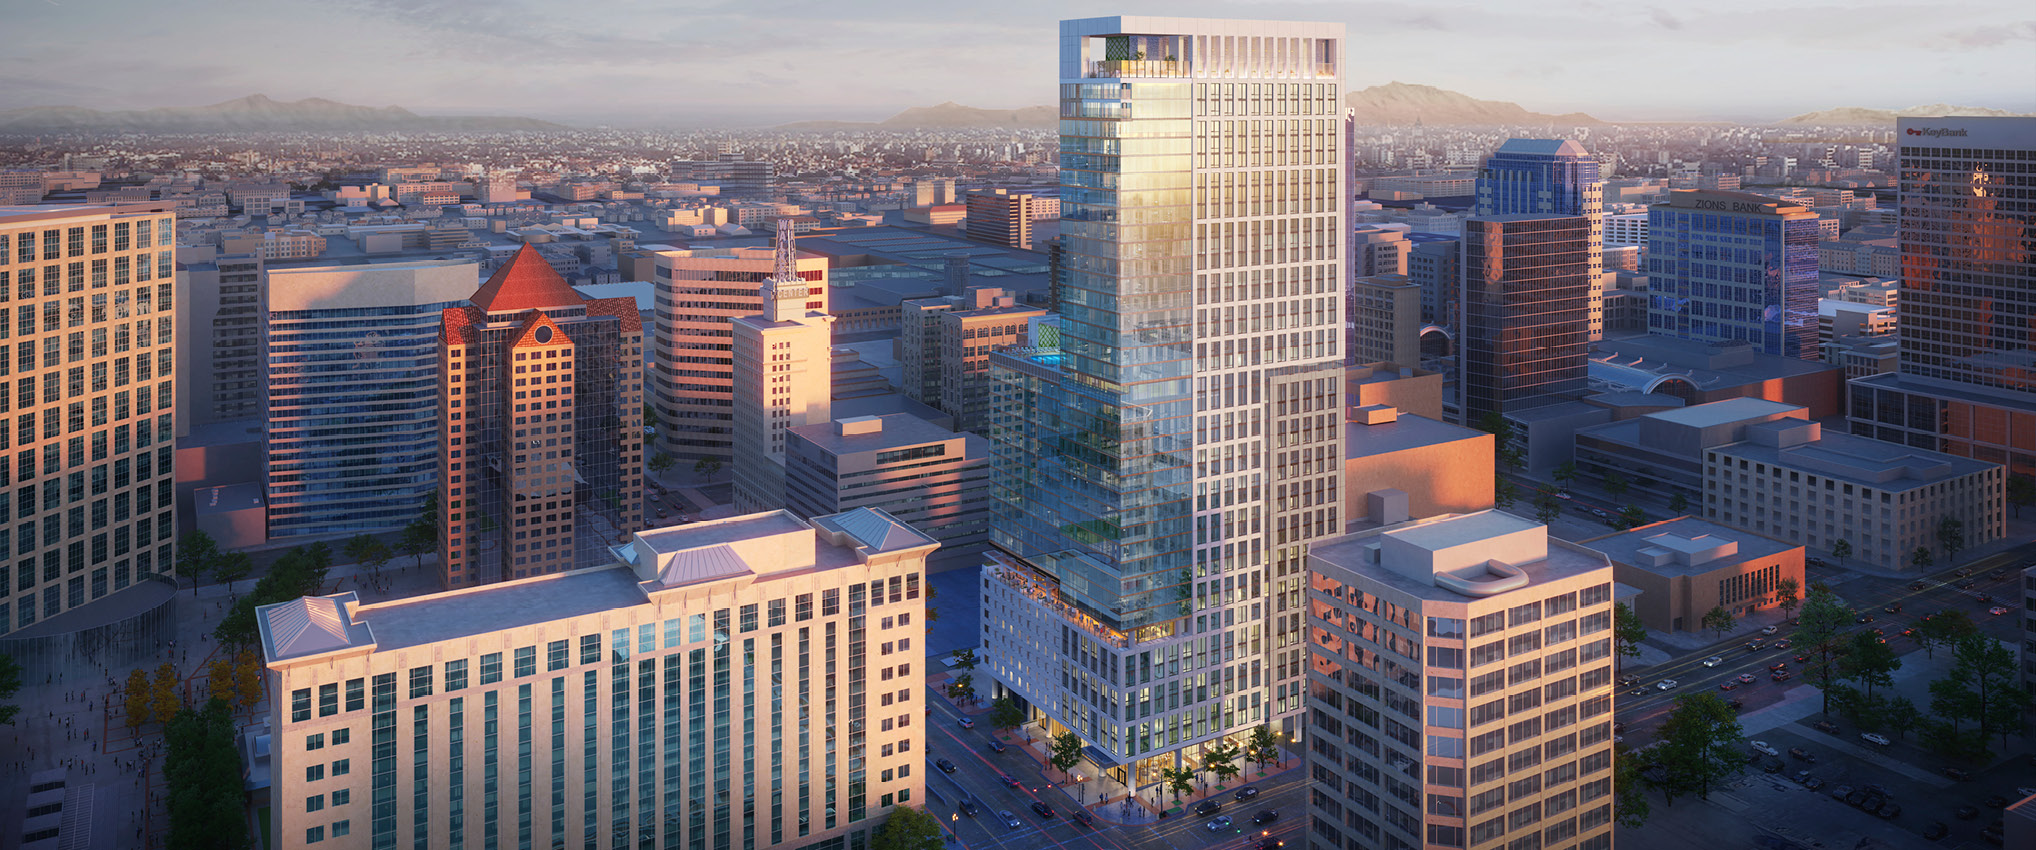 Astra Tower Set to be the Tallest High-Rise Along Salt Lake City’s Skyline